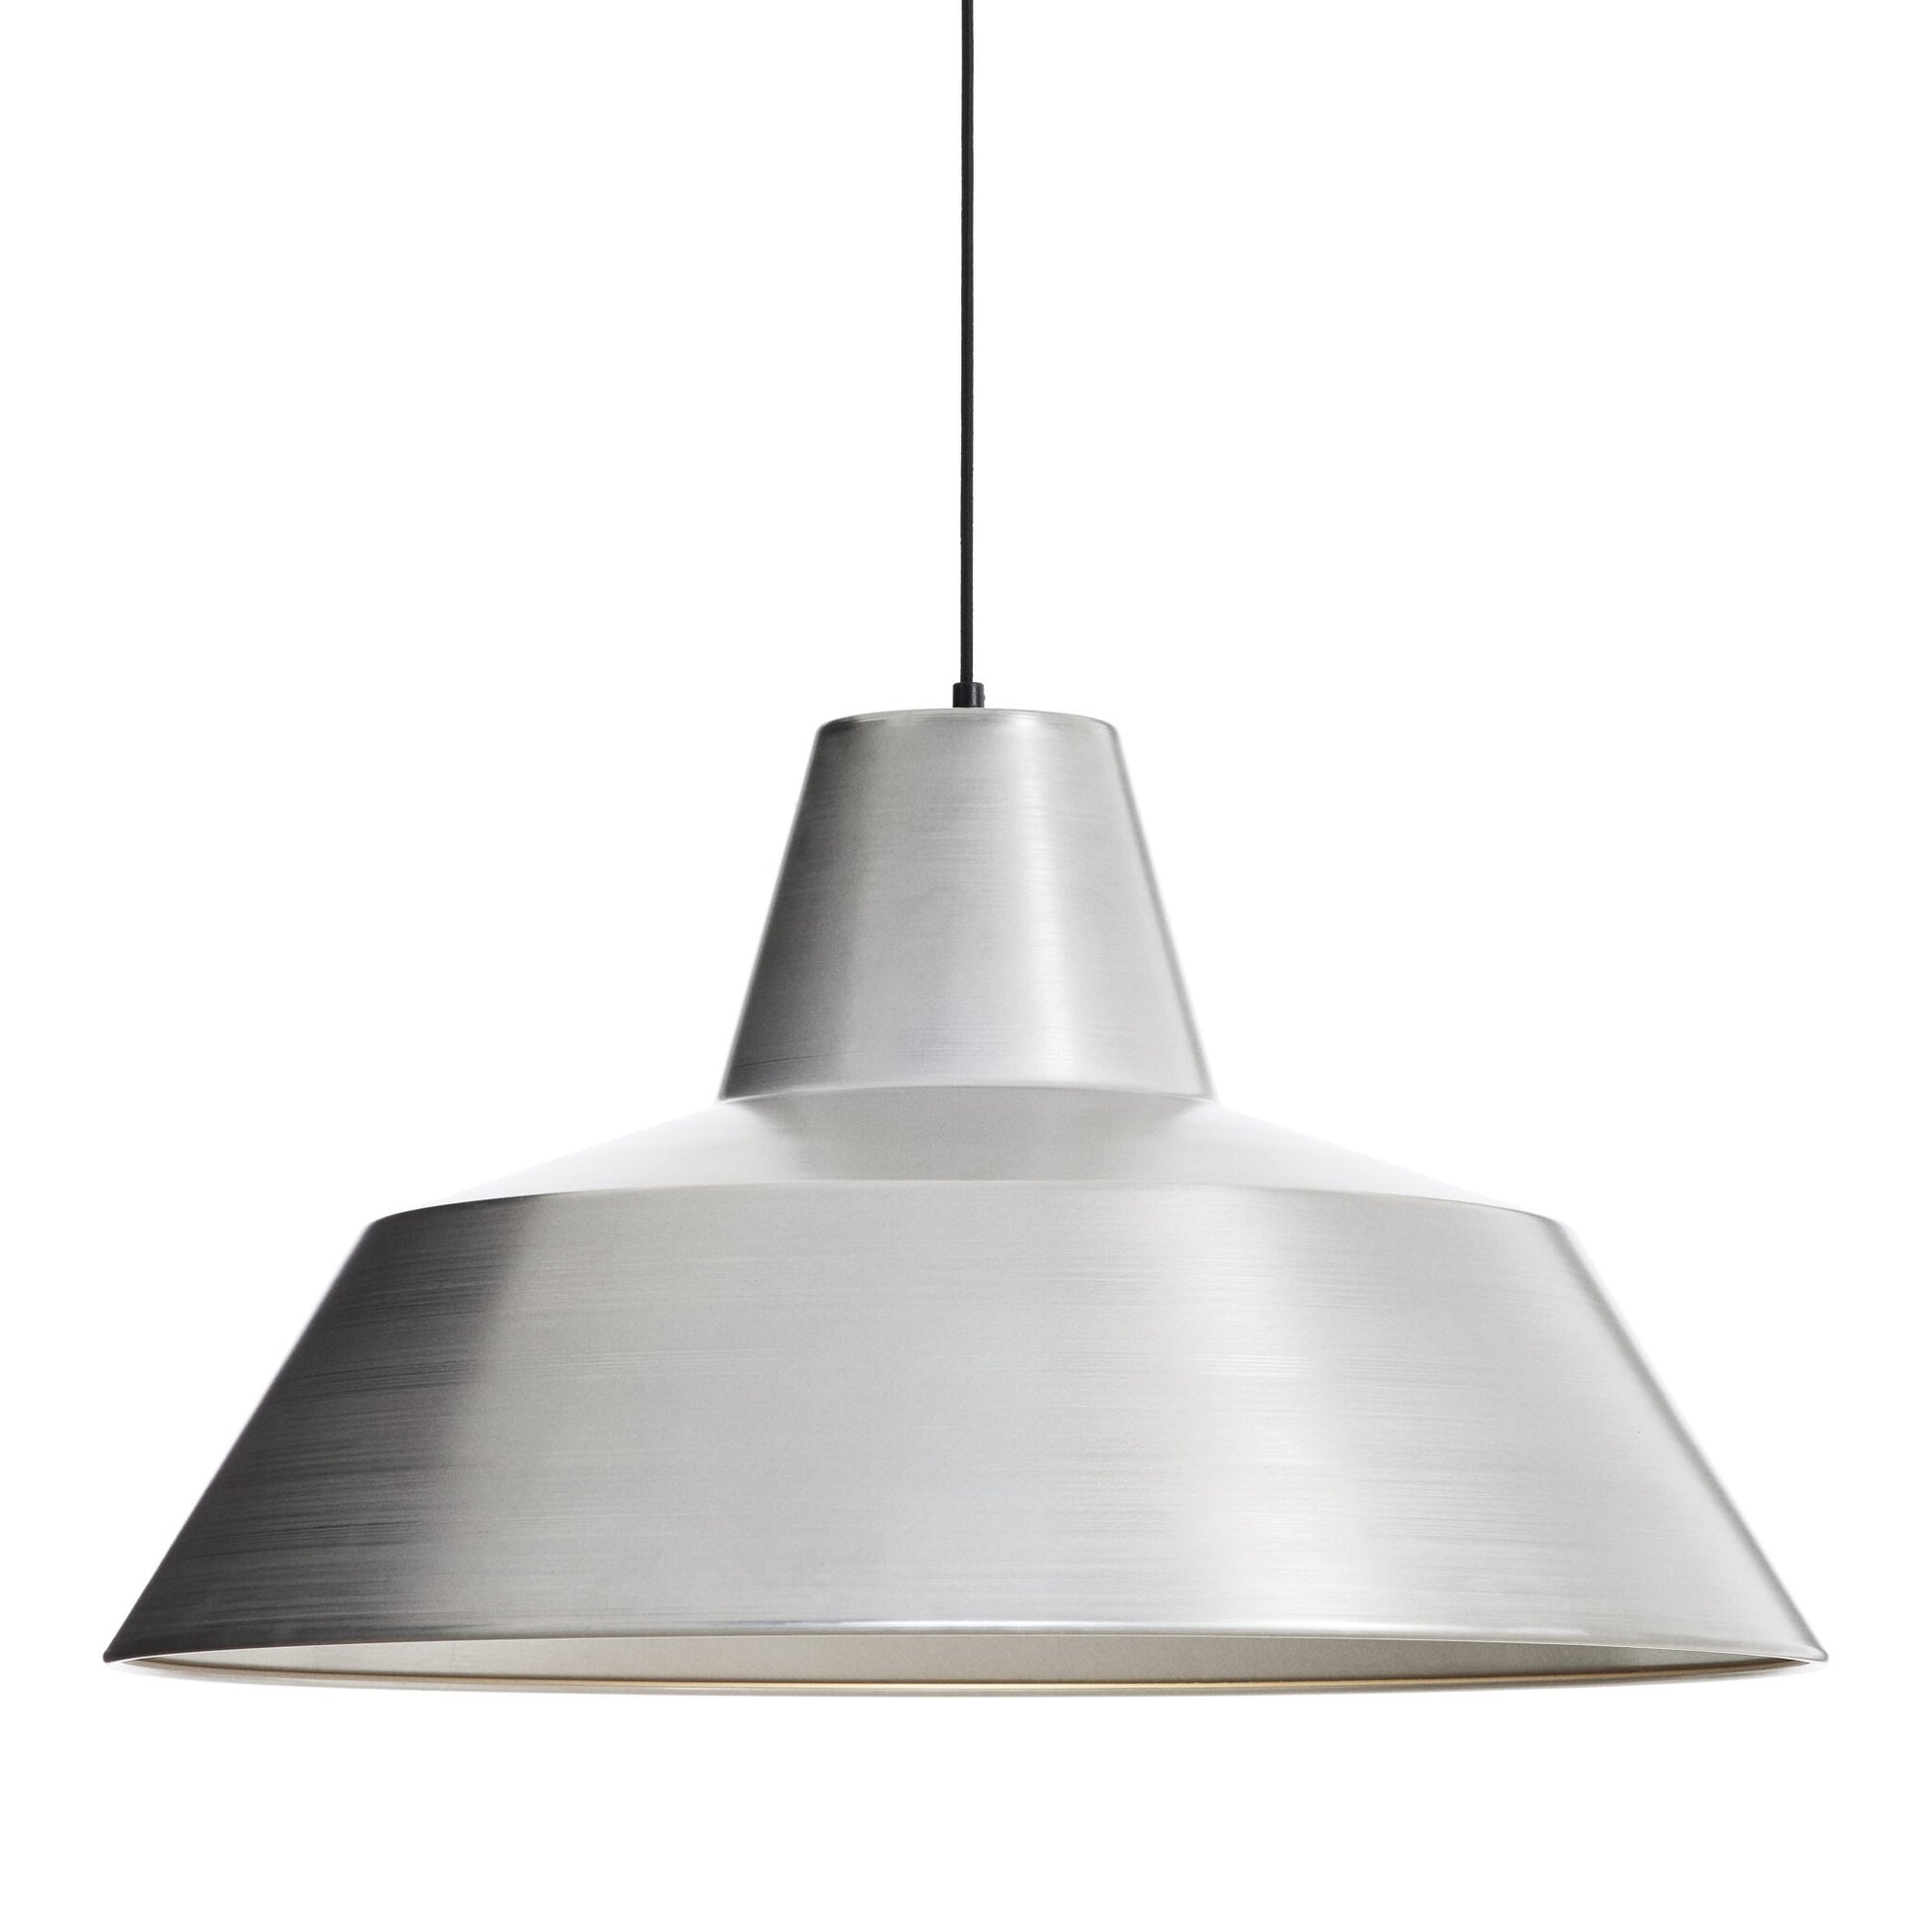 Workshop Lamp Pendant Lamp W5 by Made By Hand #Aluminium